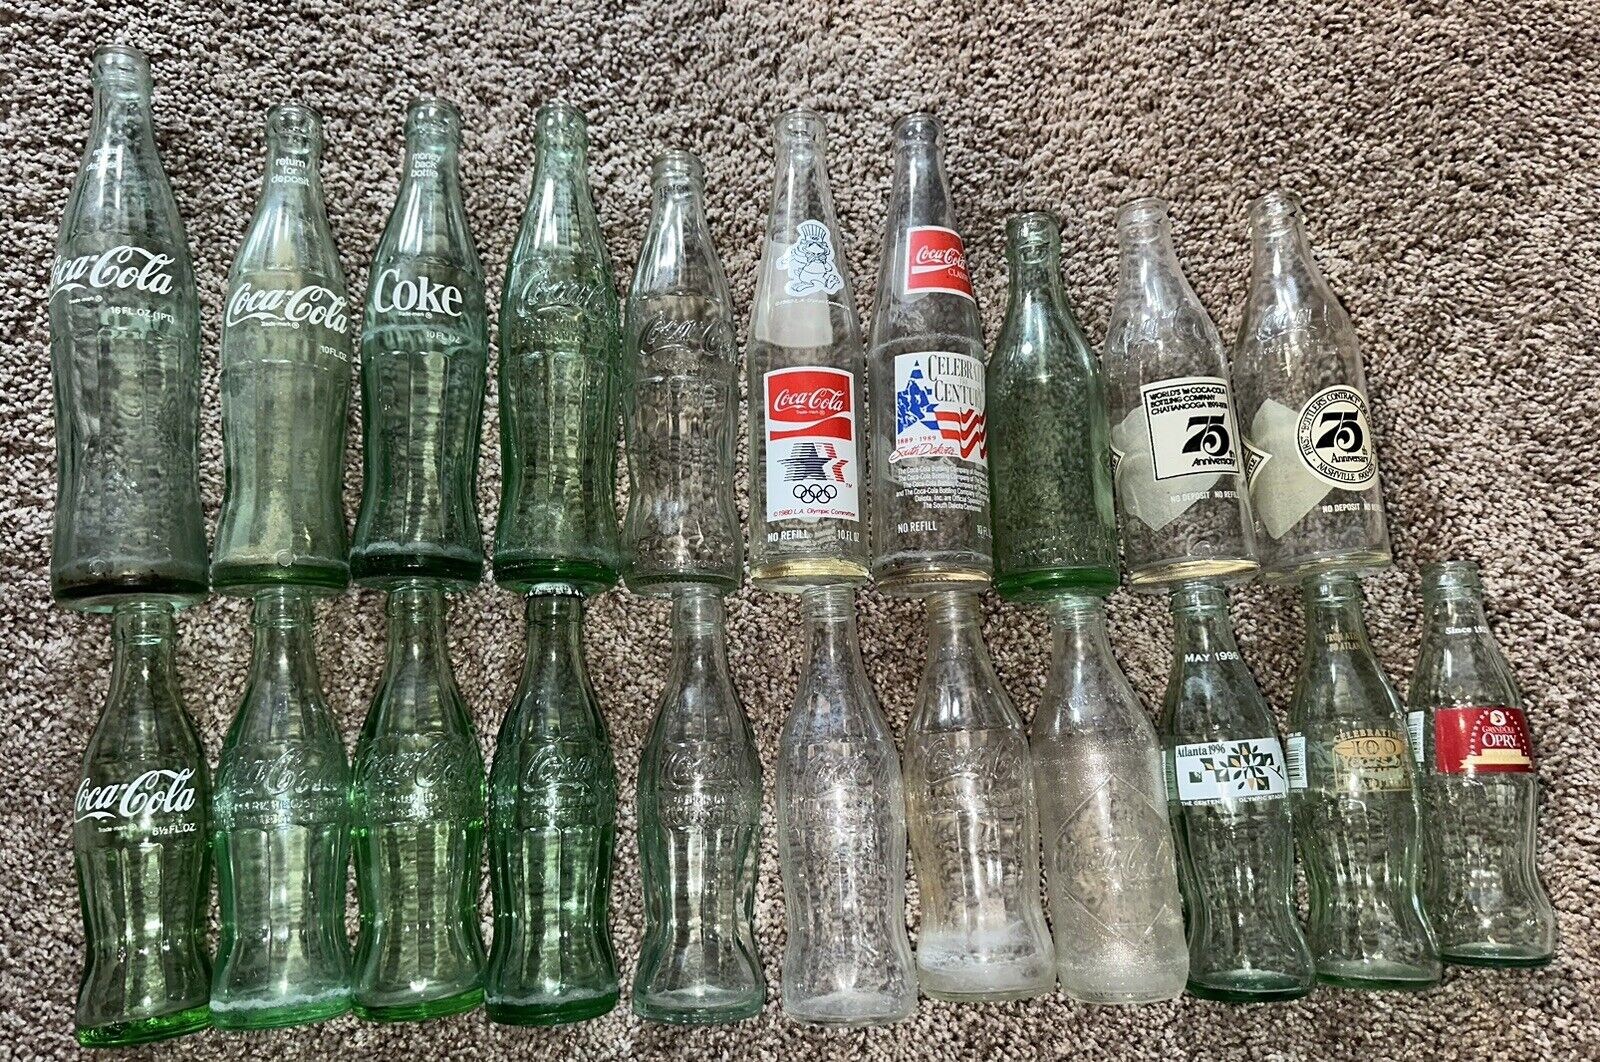 🔥 Lot Of 21 - Antique Coca Cola Coke Bottles - Some Over 100 Years Old 🔥